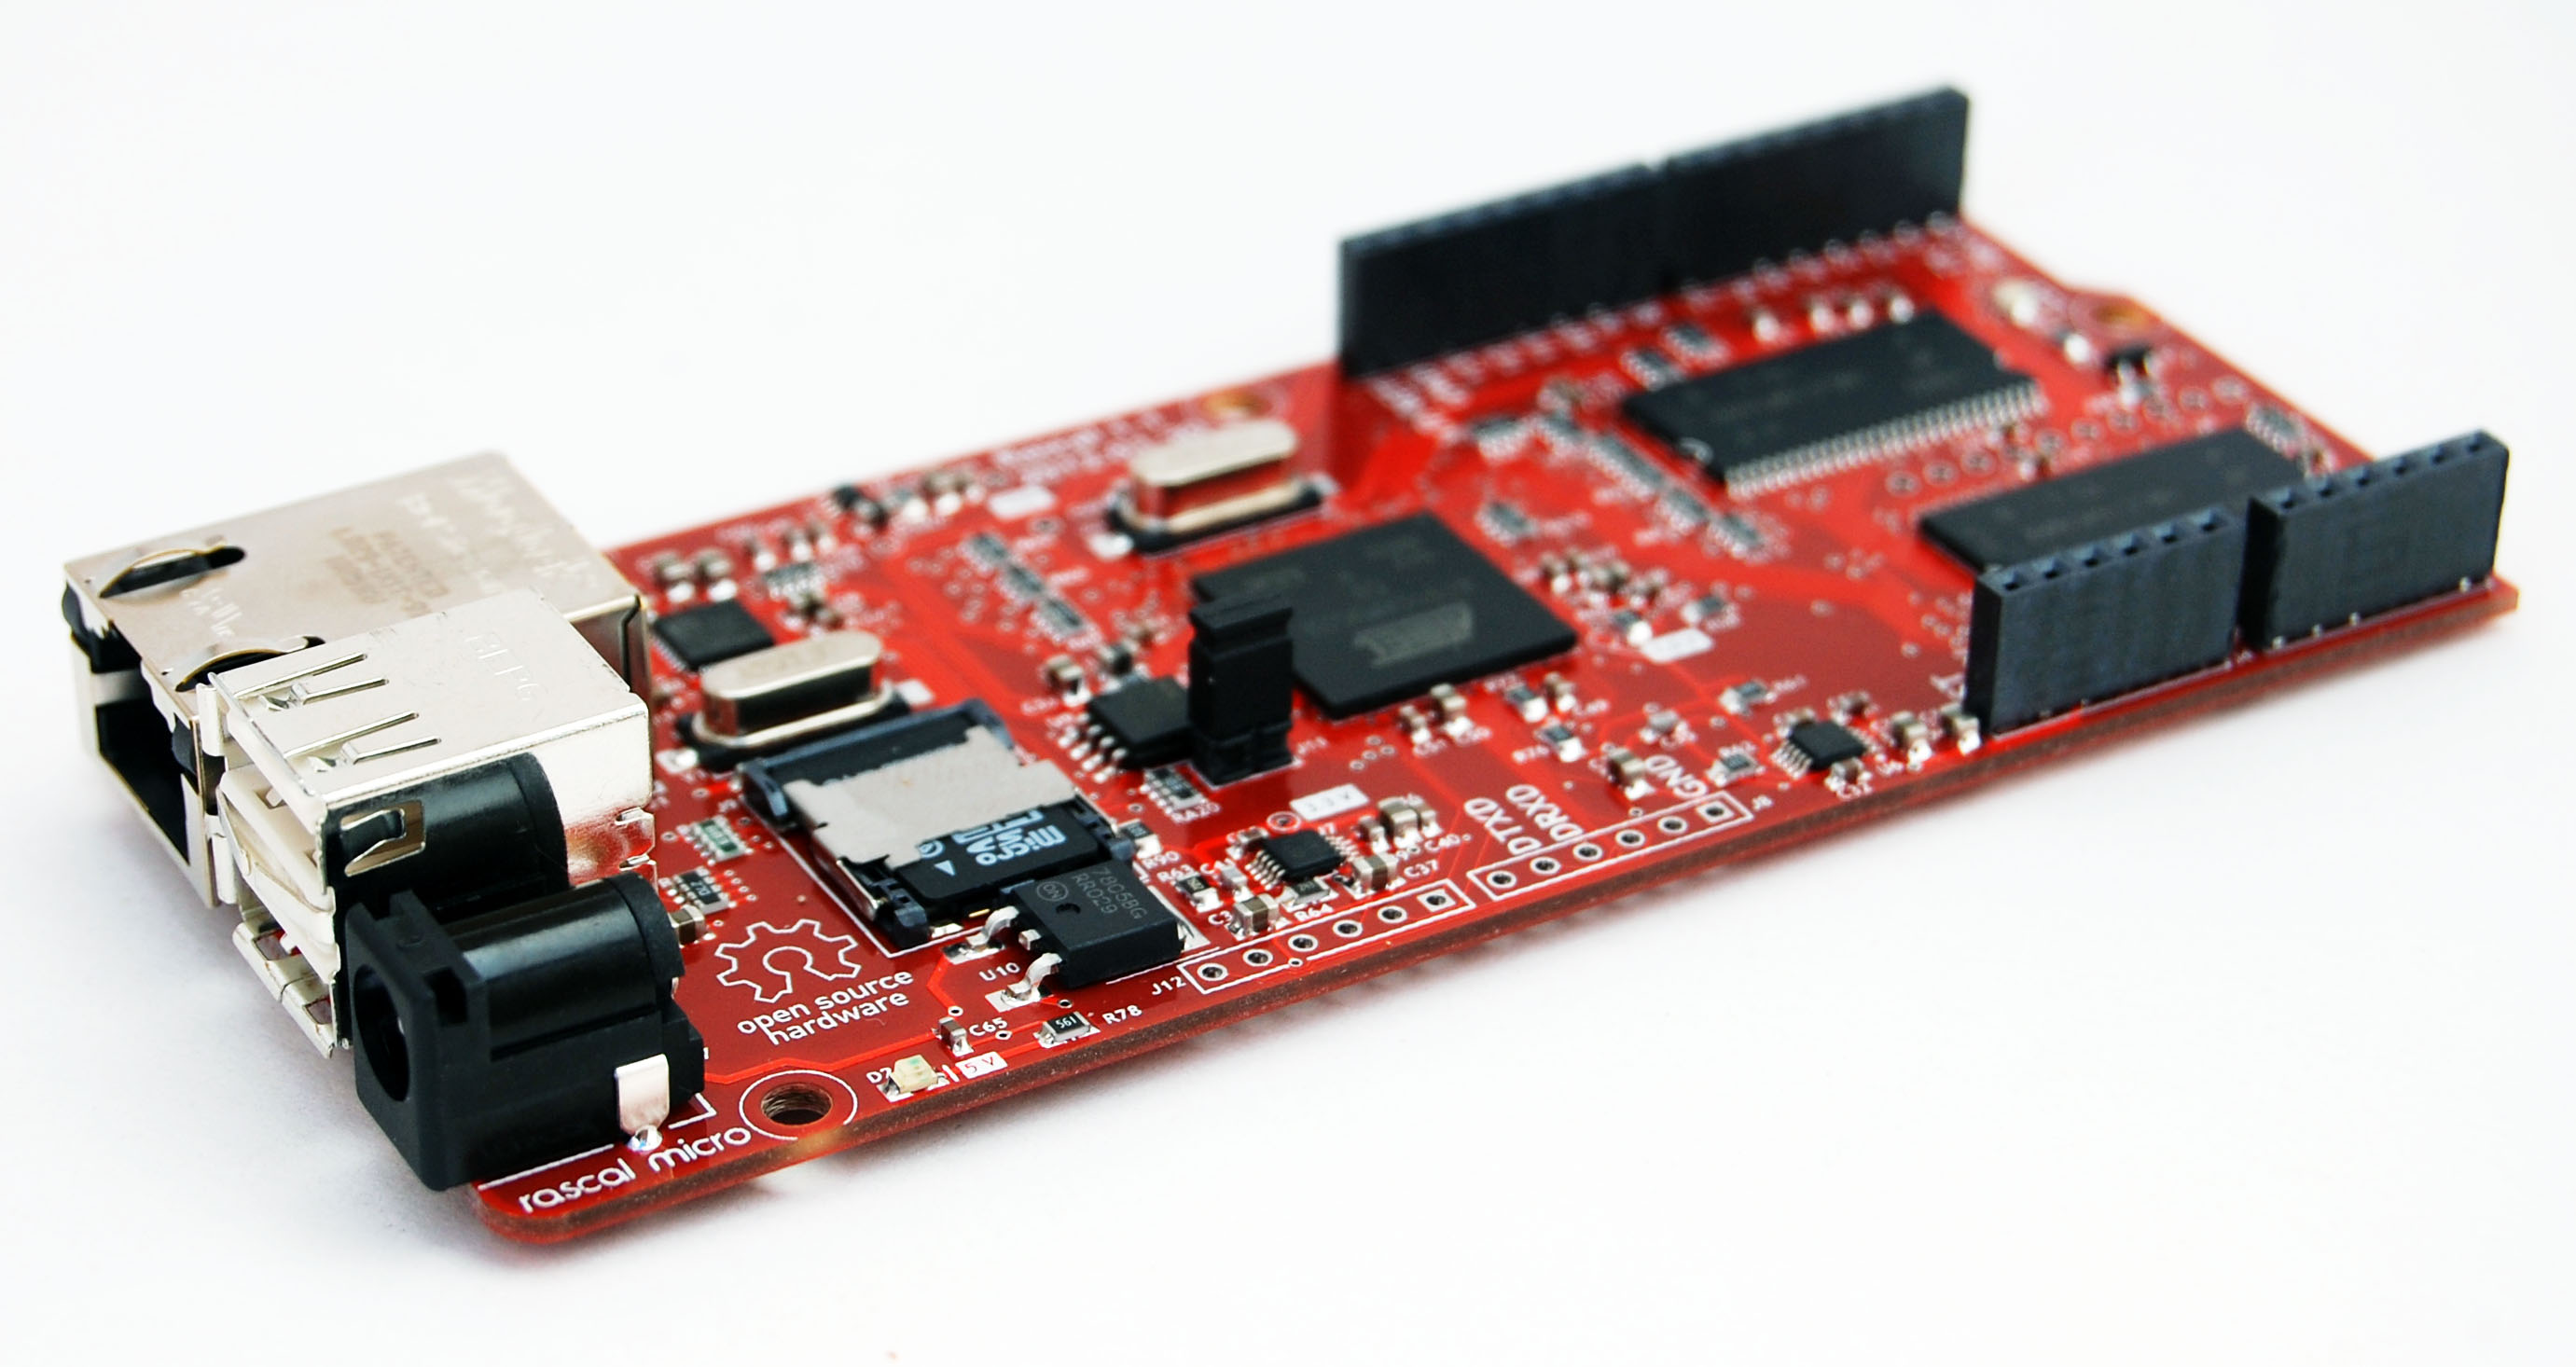 A red circuit board used for controlling the universe